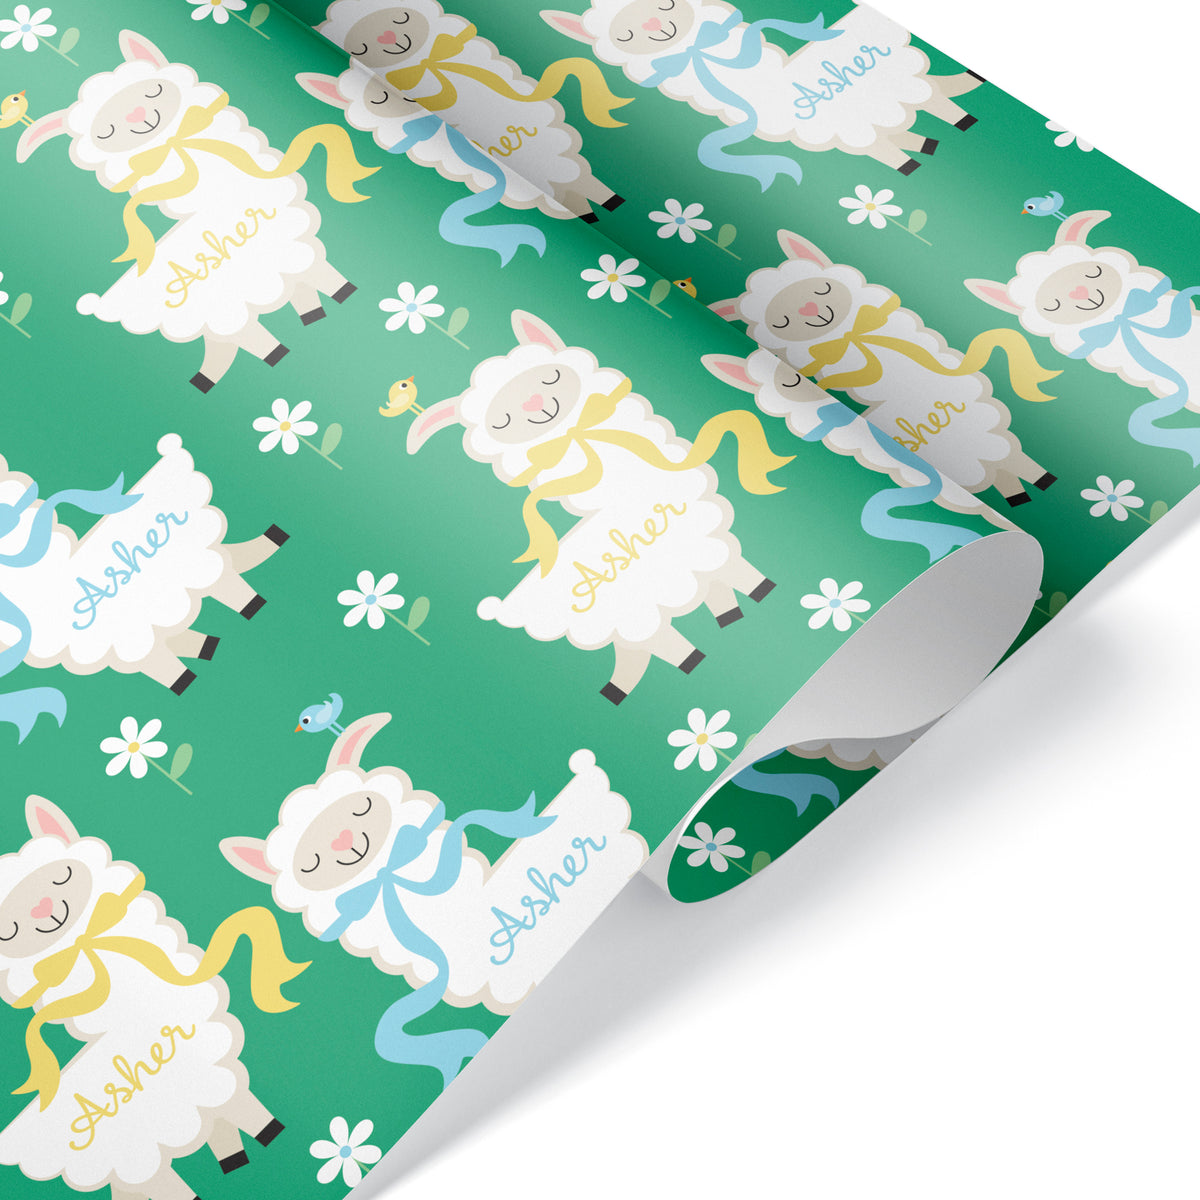 Llama Personalized Name Wrapping Paper - Yellow/Blue